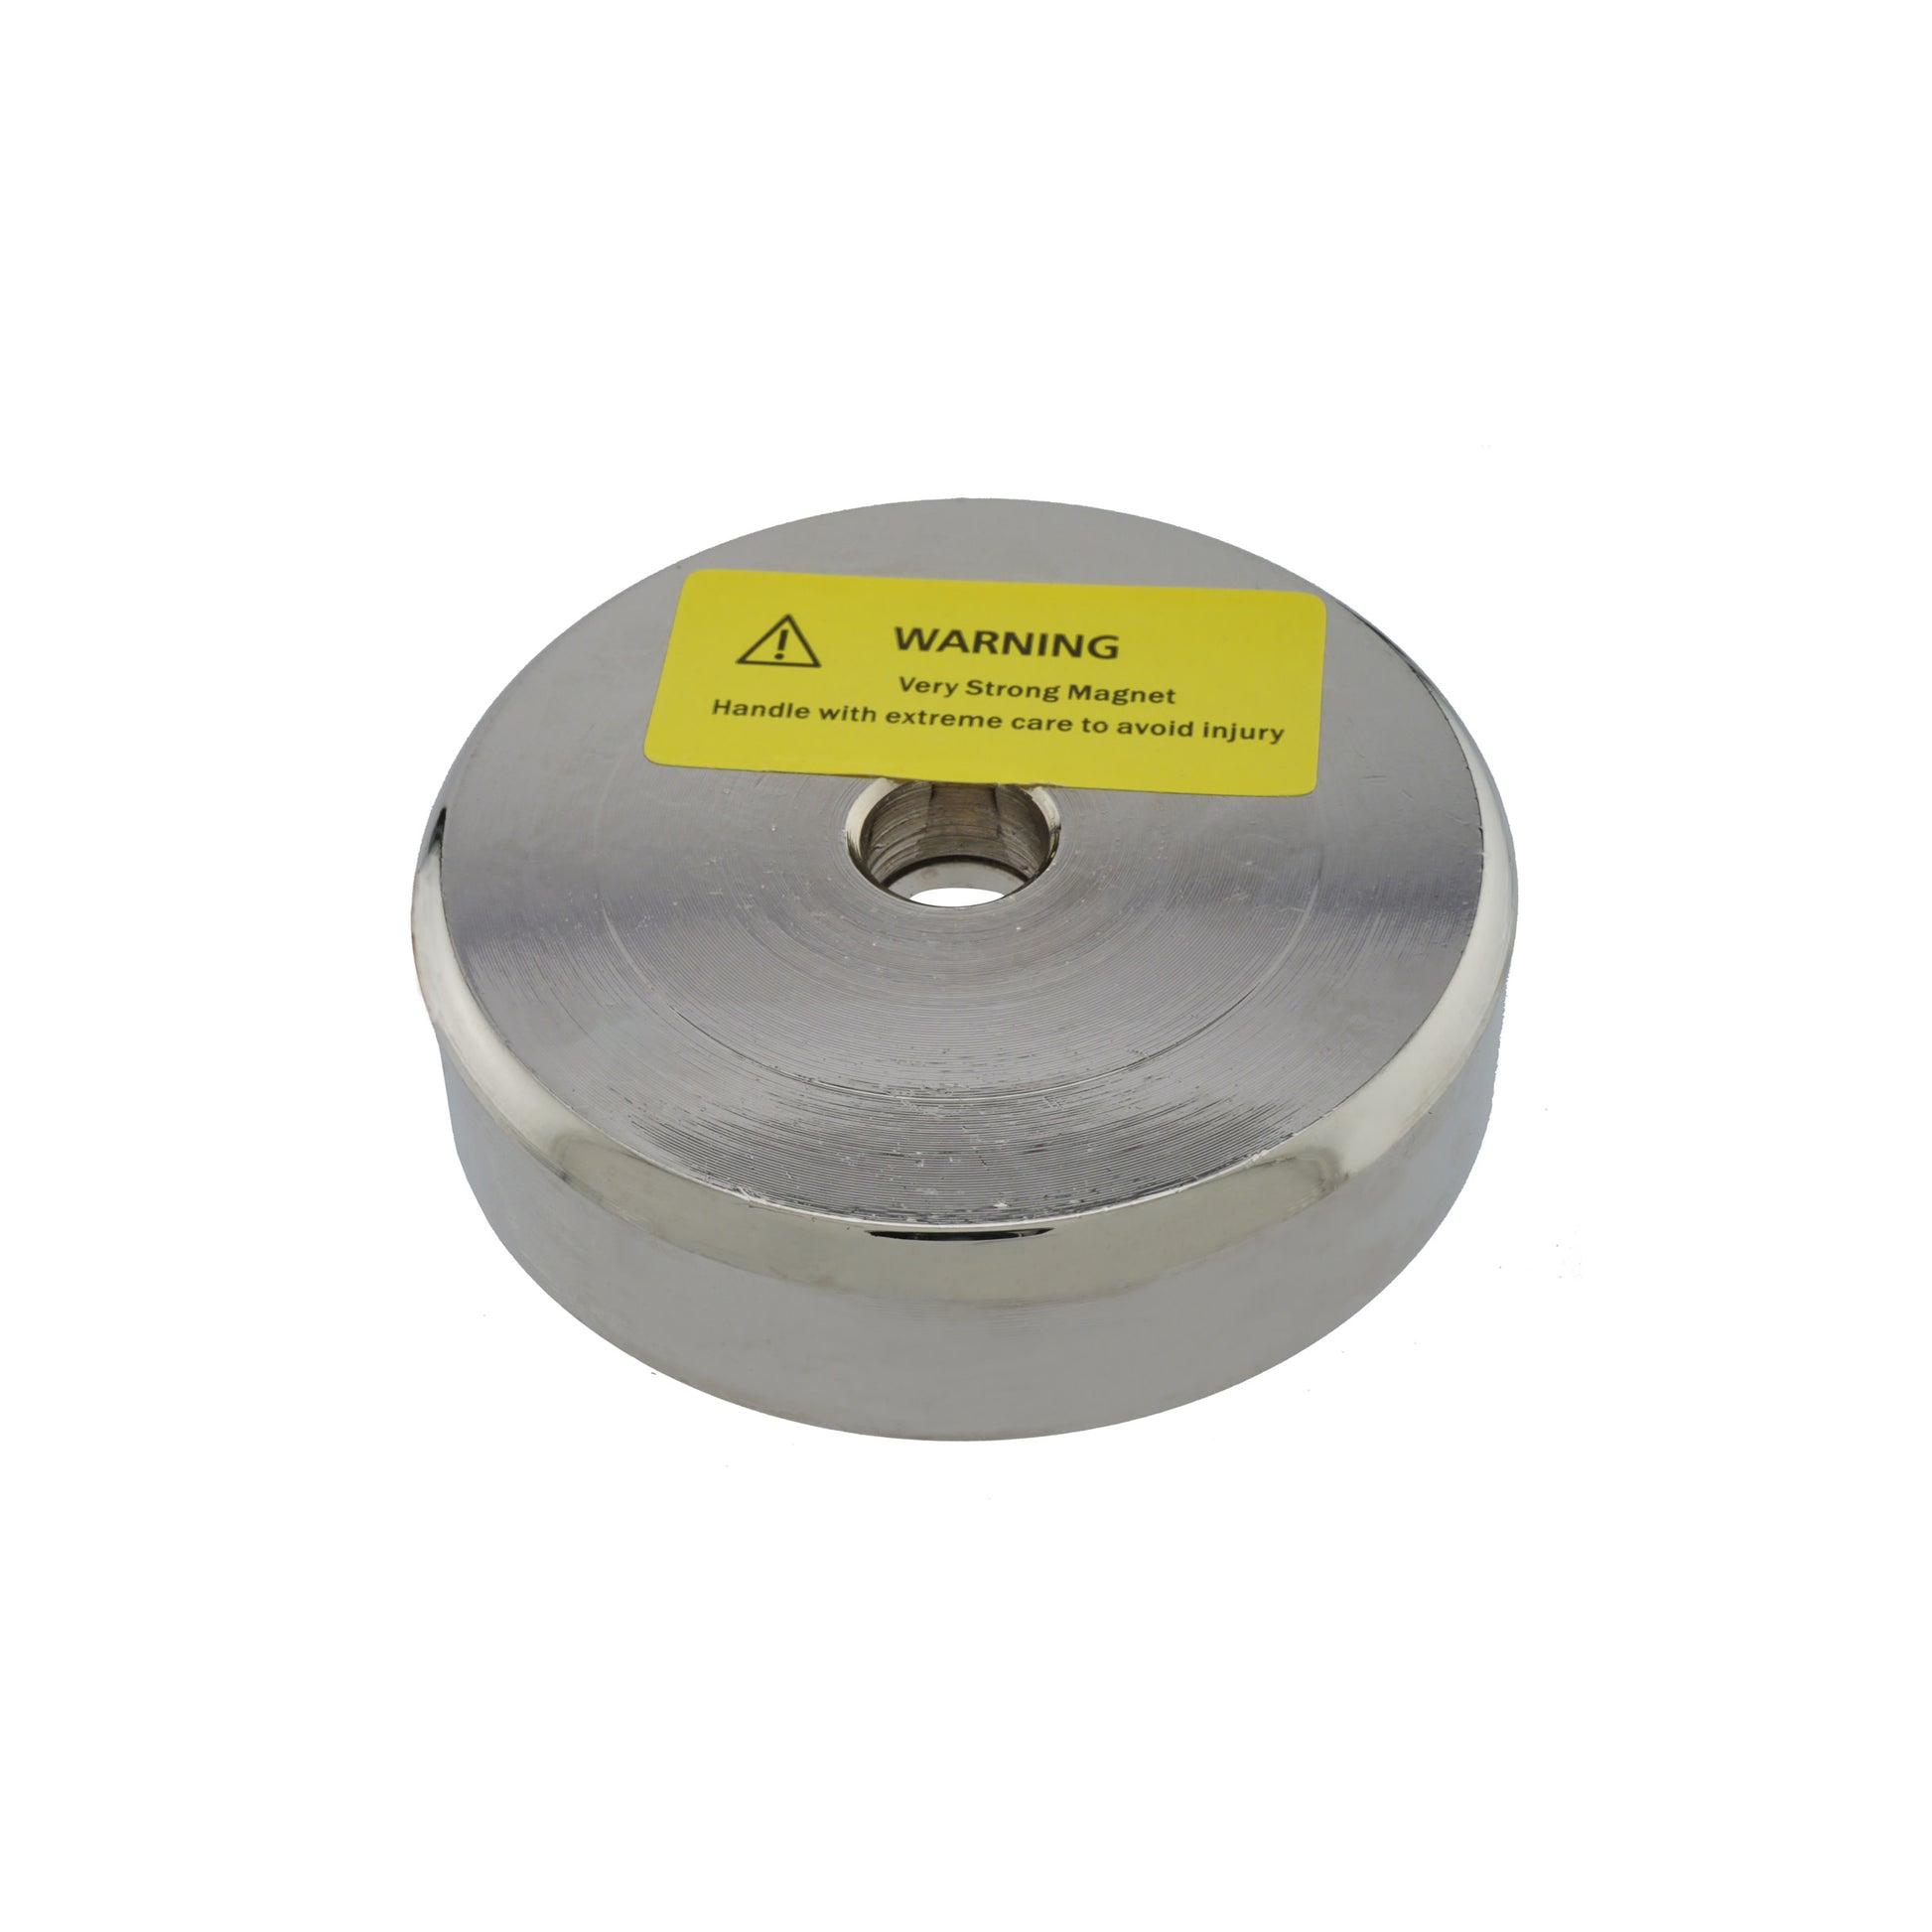 Load image into Gallery viewer, NAC025000NBX Neodymium Countersunk Round Base Assembly - 45 Degree Angle View